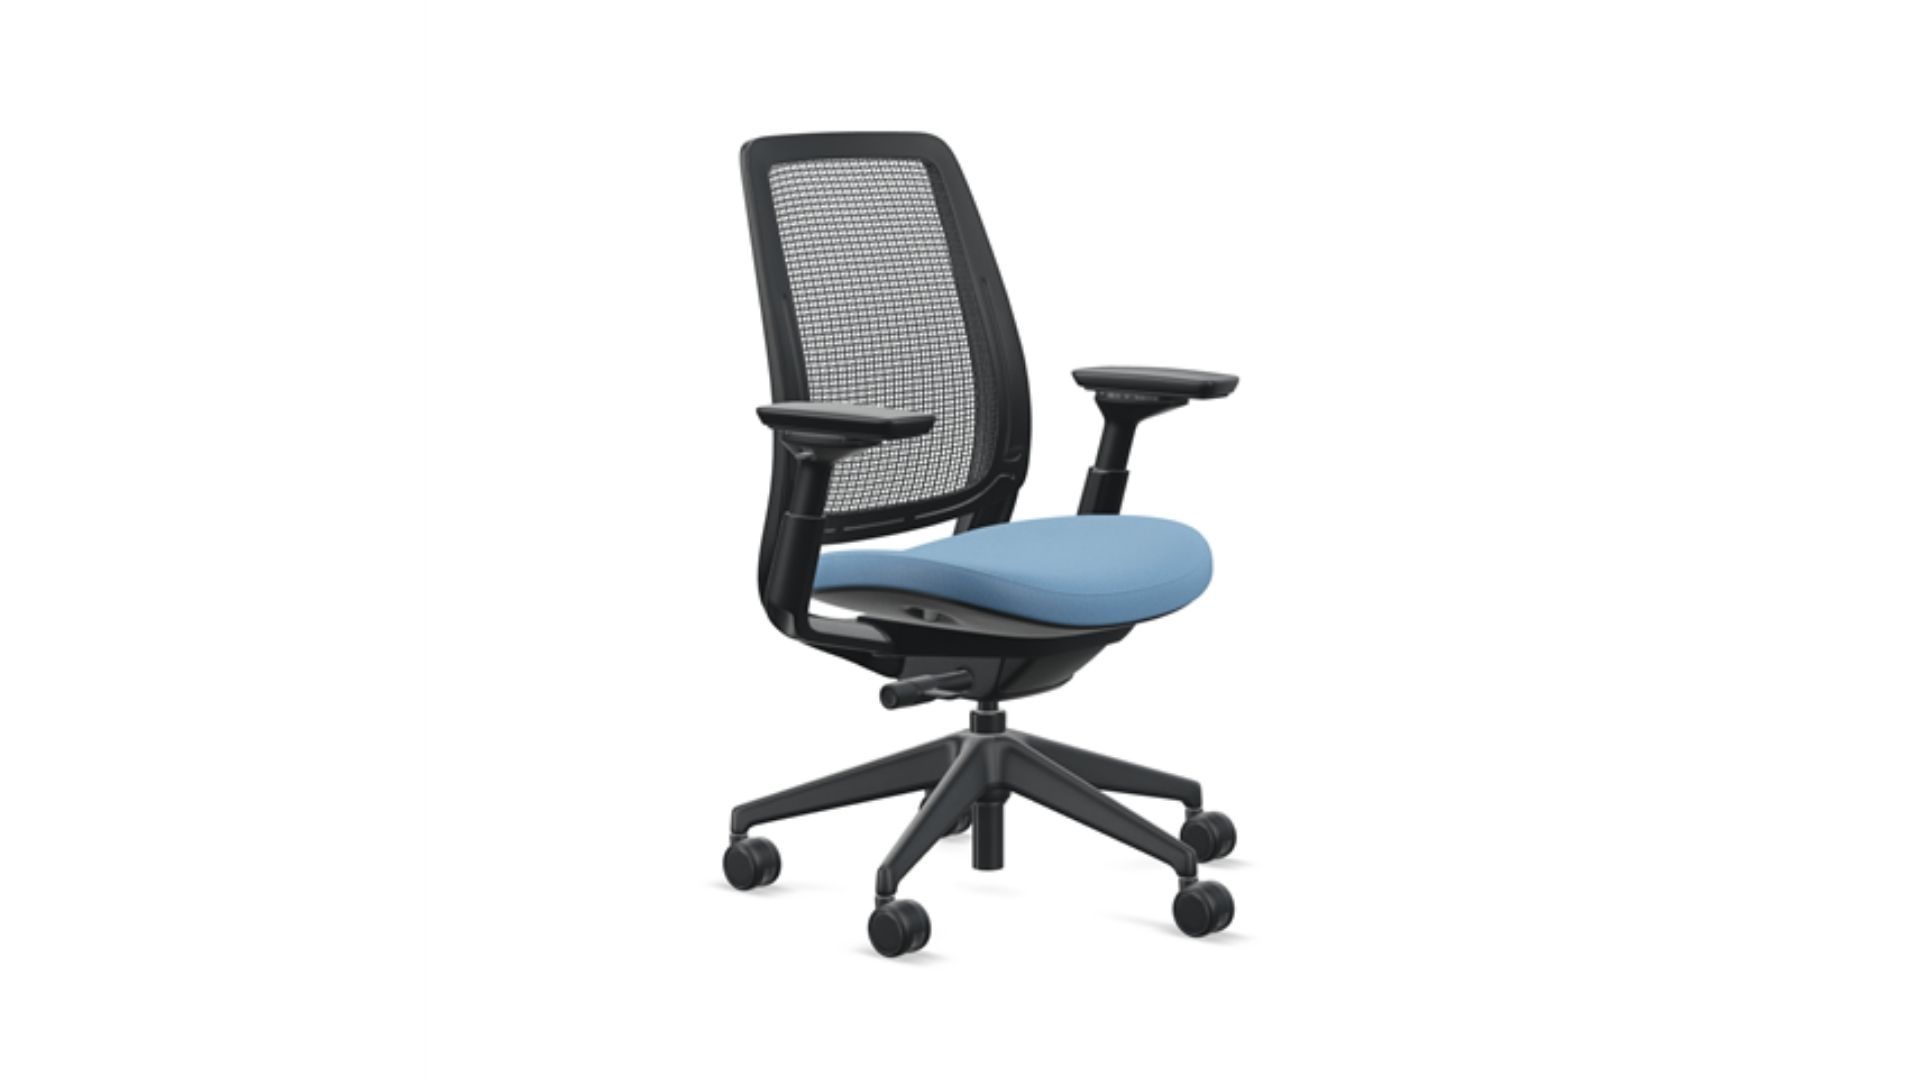 The Steelcase Series 2 ergonomic chair with blue upholstery tilted slightly to the right.